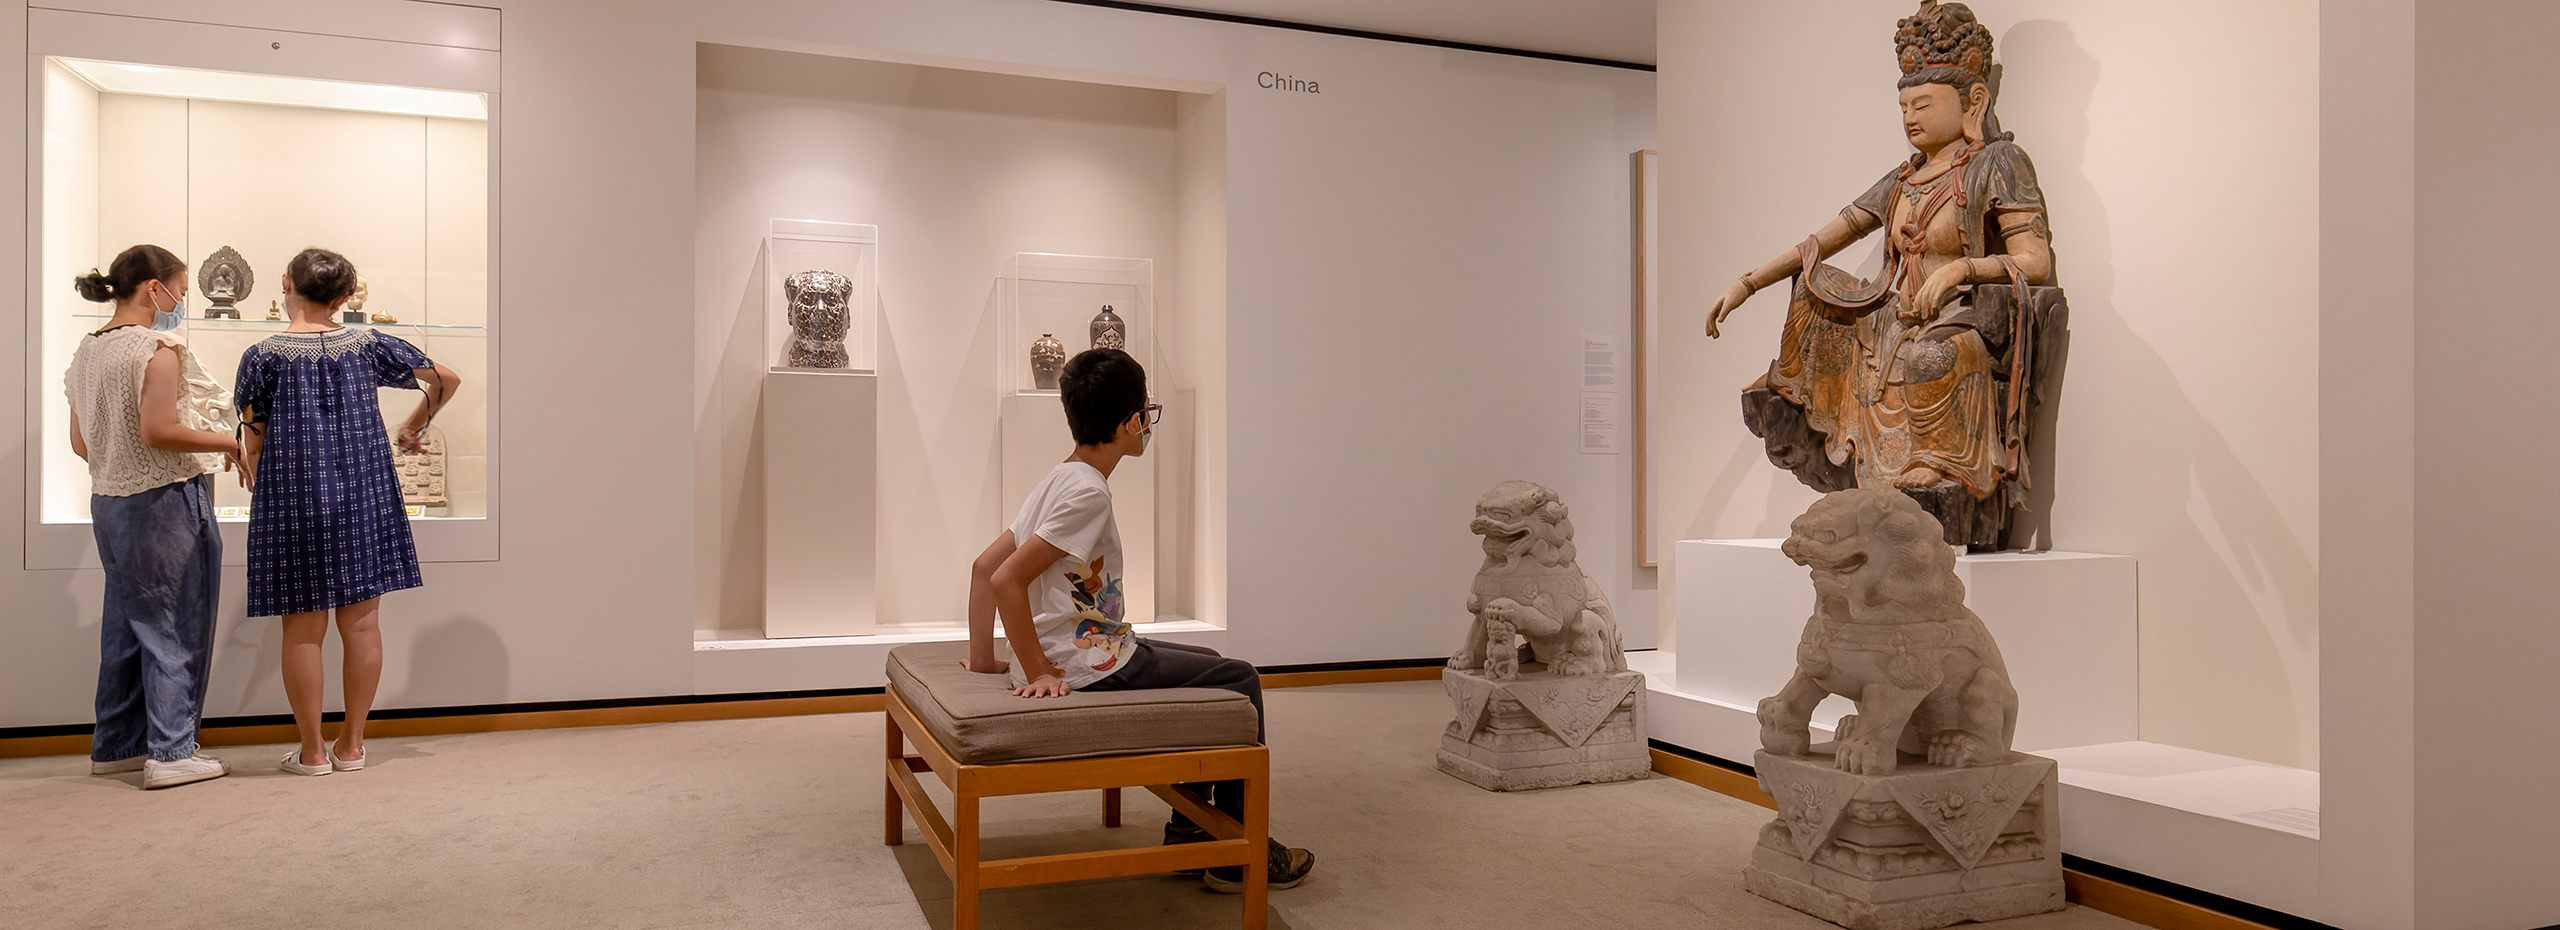 Two women and a boy visit a gallery of art from China including a large statue of a goddess flanked by stone lions